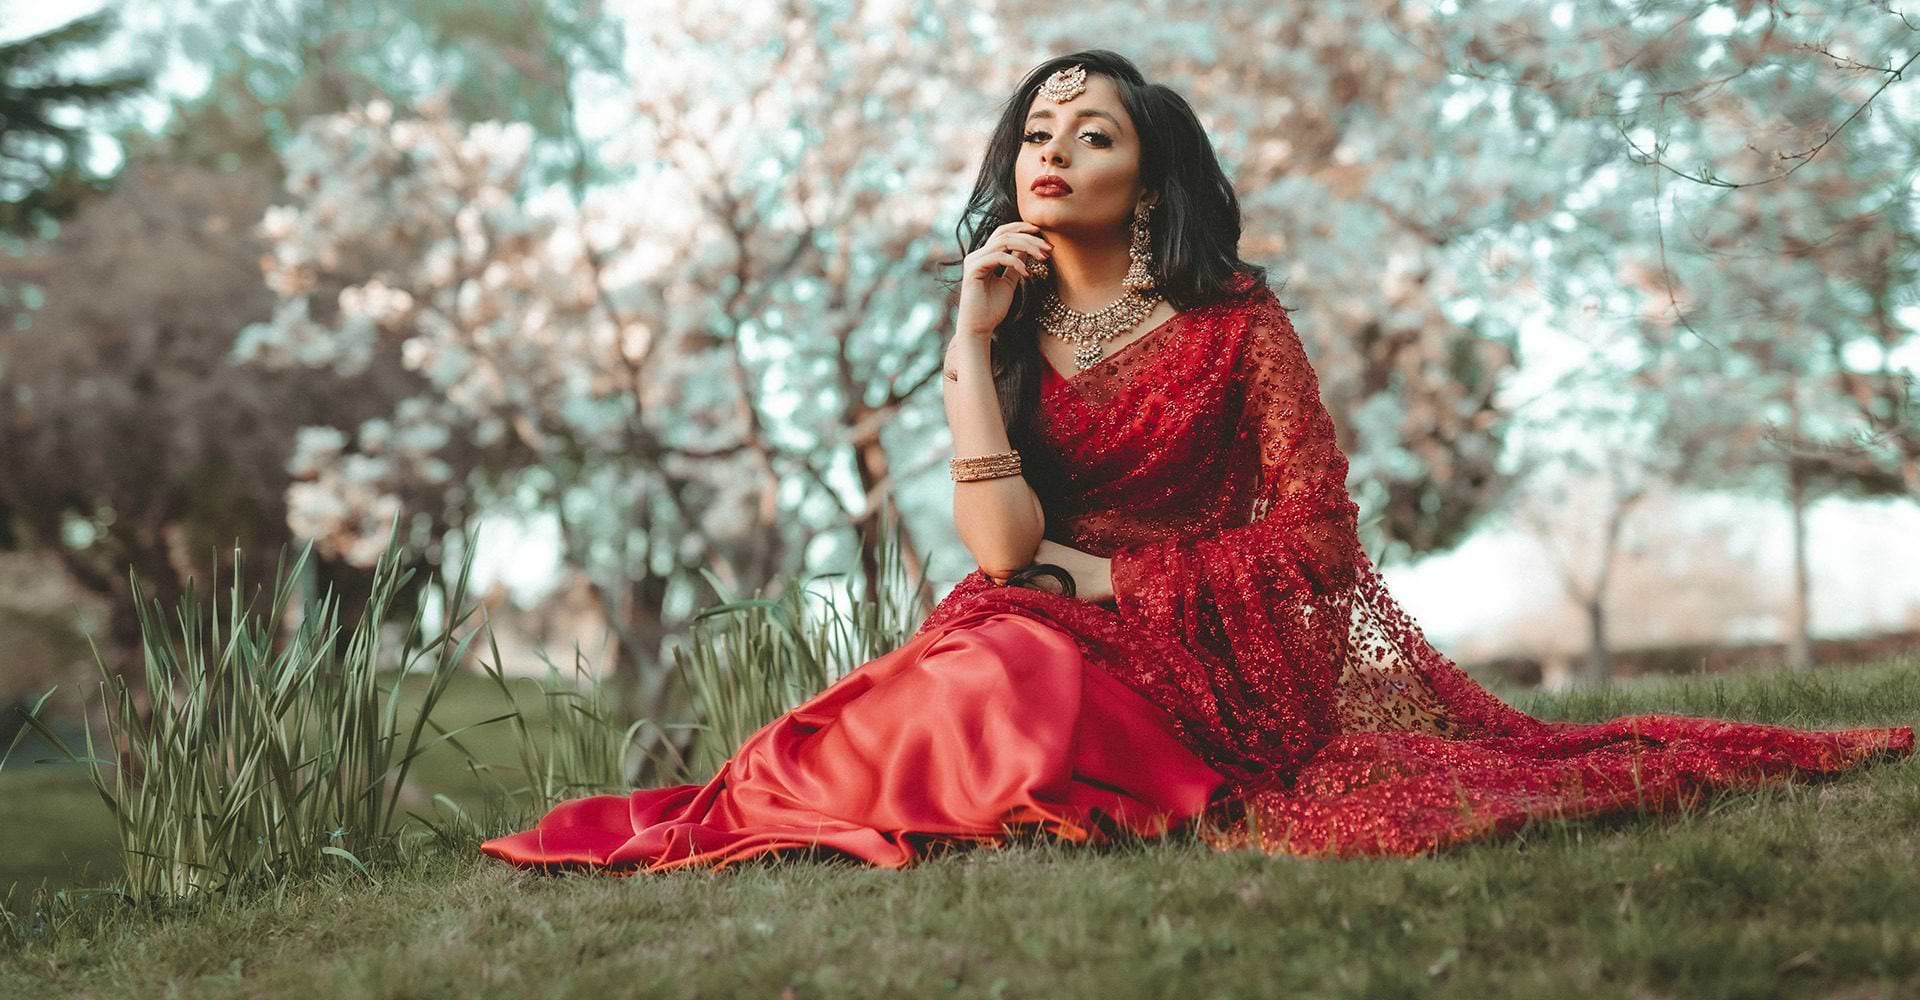 A bride sitting on grass in a red South Asian wedding dress